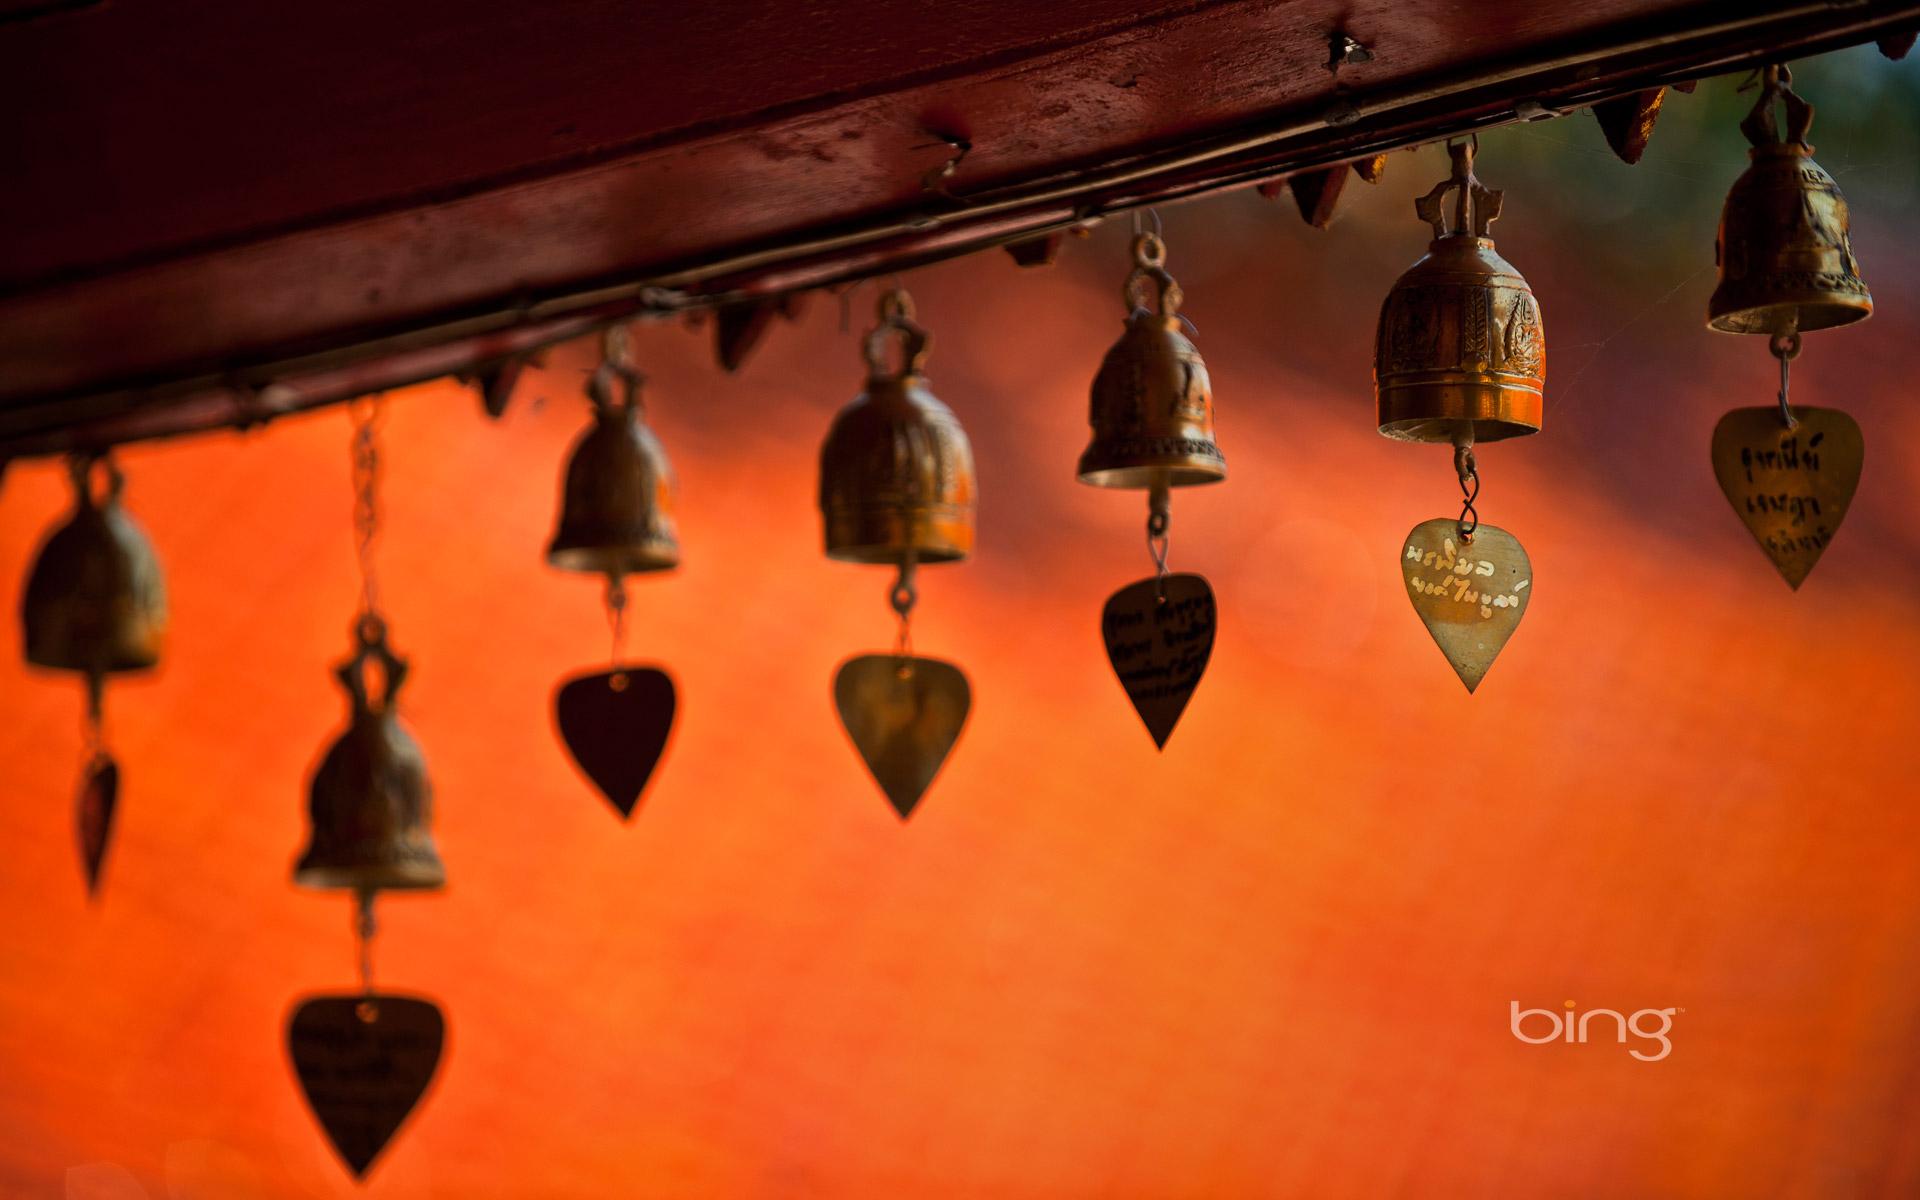 Temple Bells And Chimes, Chiang Mai, Thailand © WIN Initiative